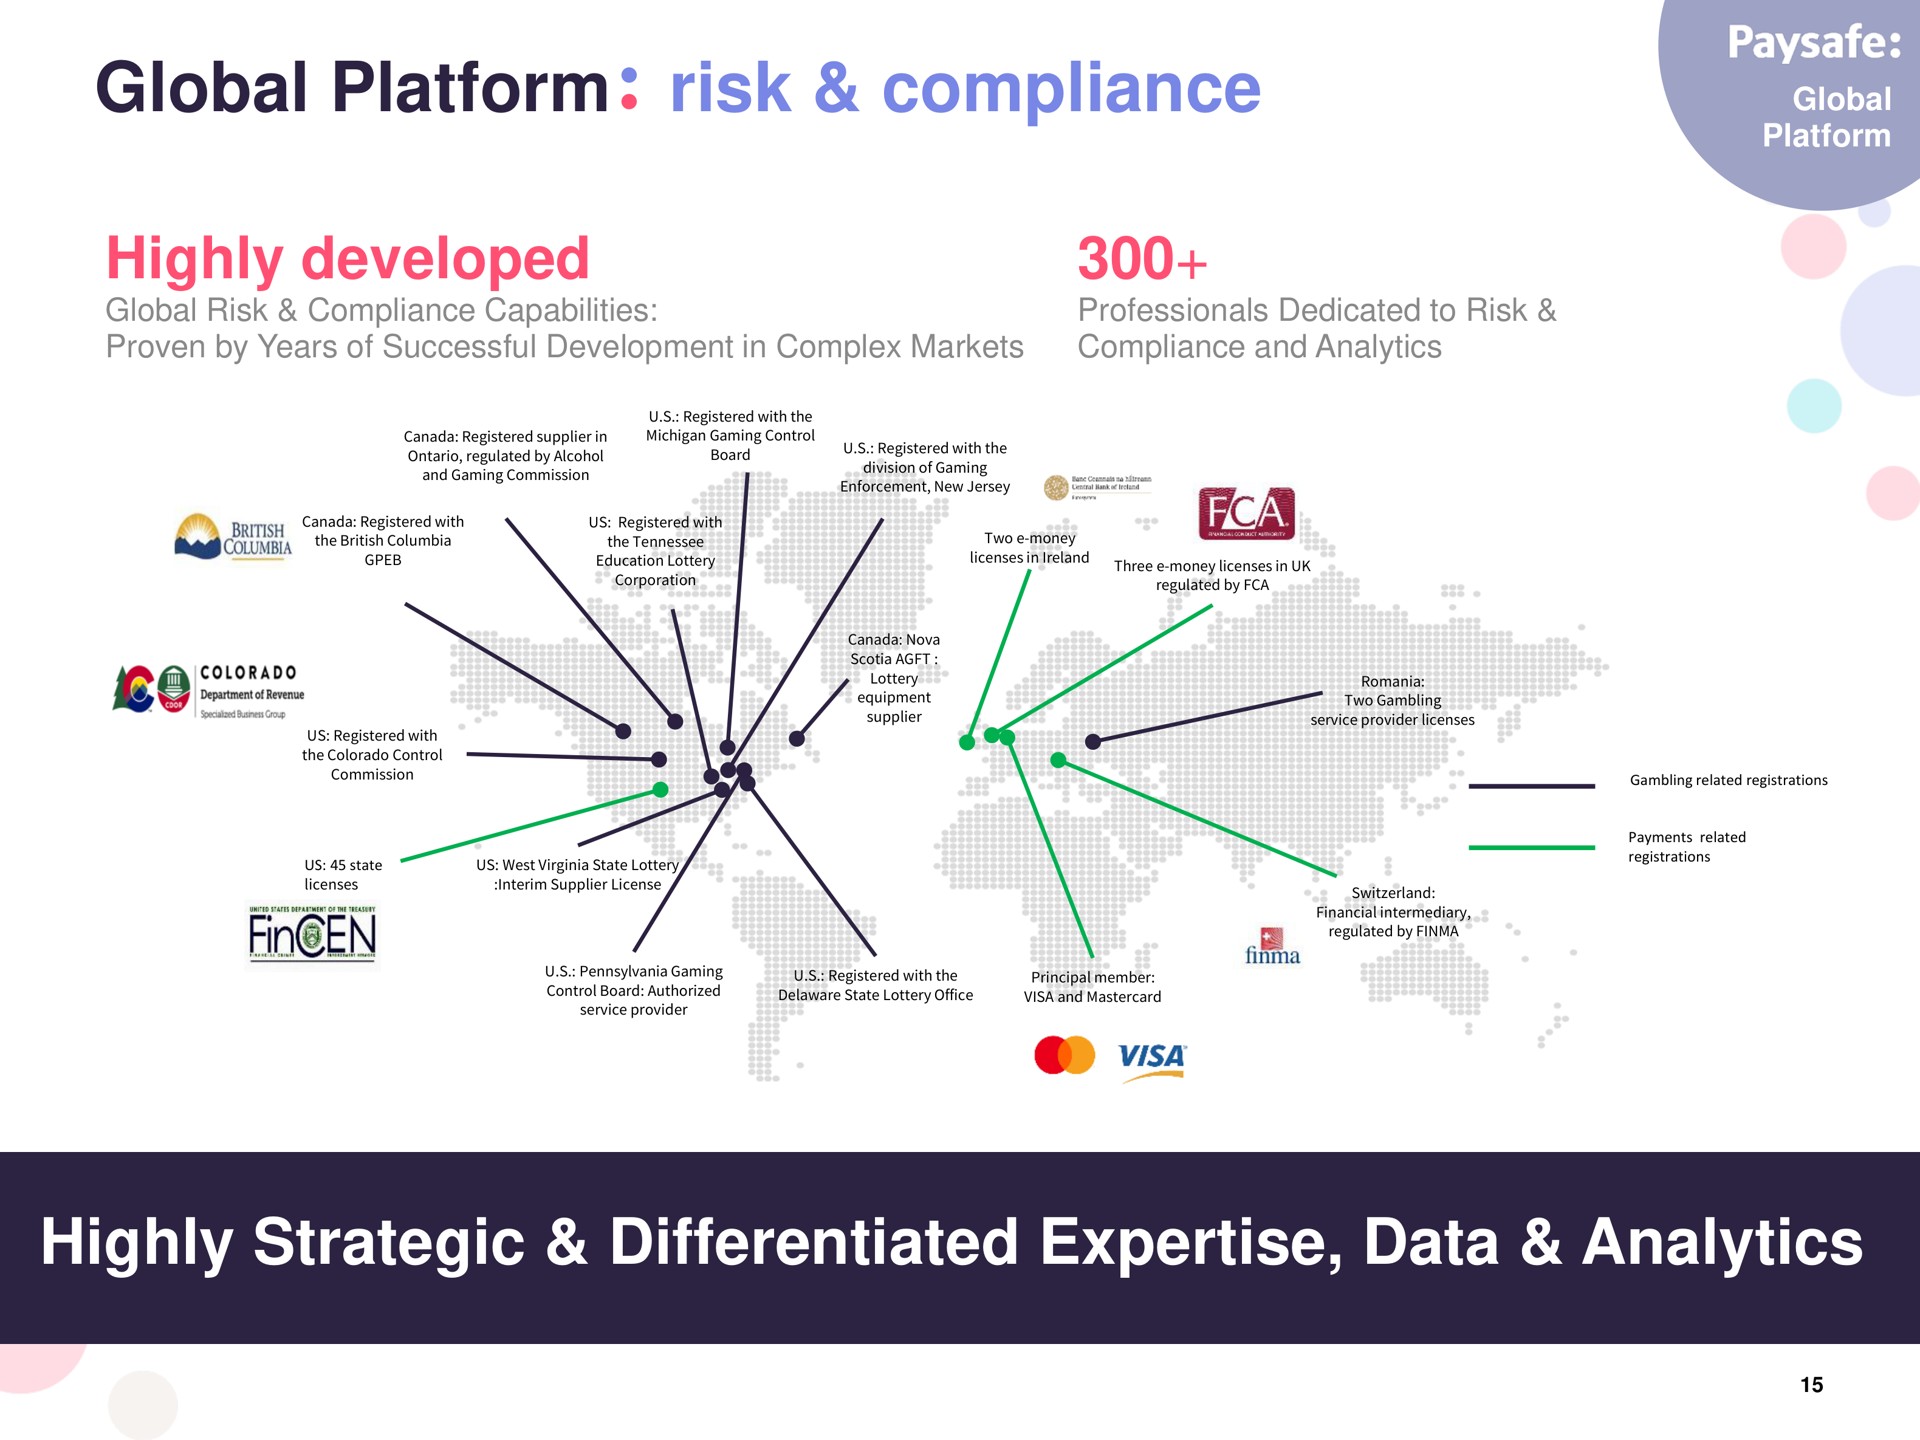 global platform risk compliance highly developed highly strategic differentiated data analytics | Paysafe